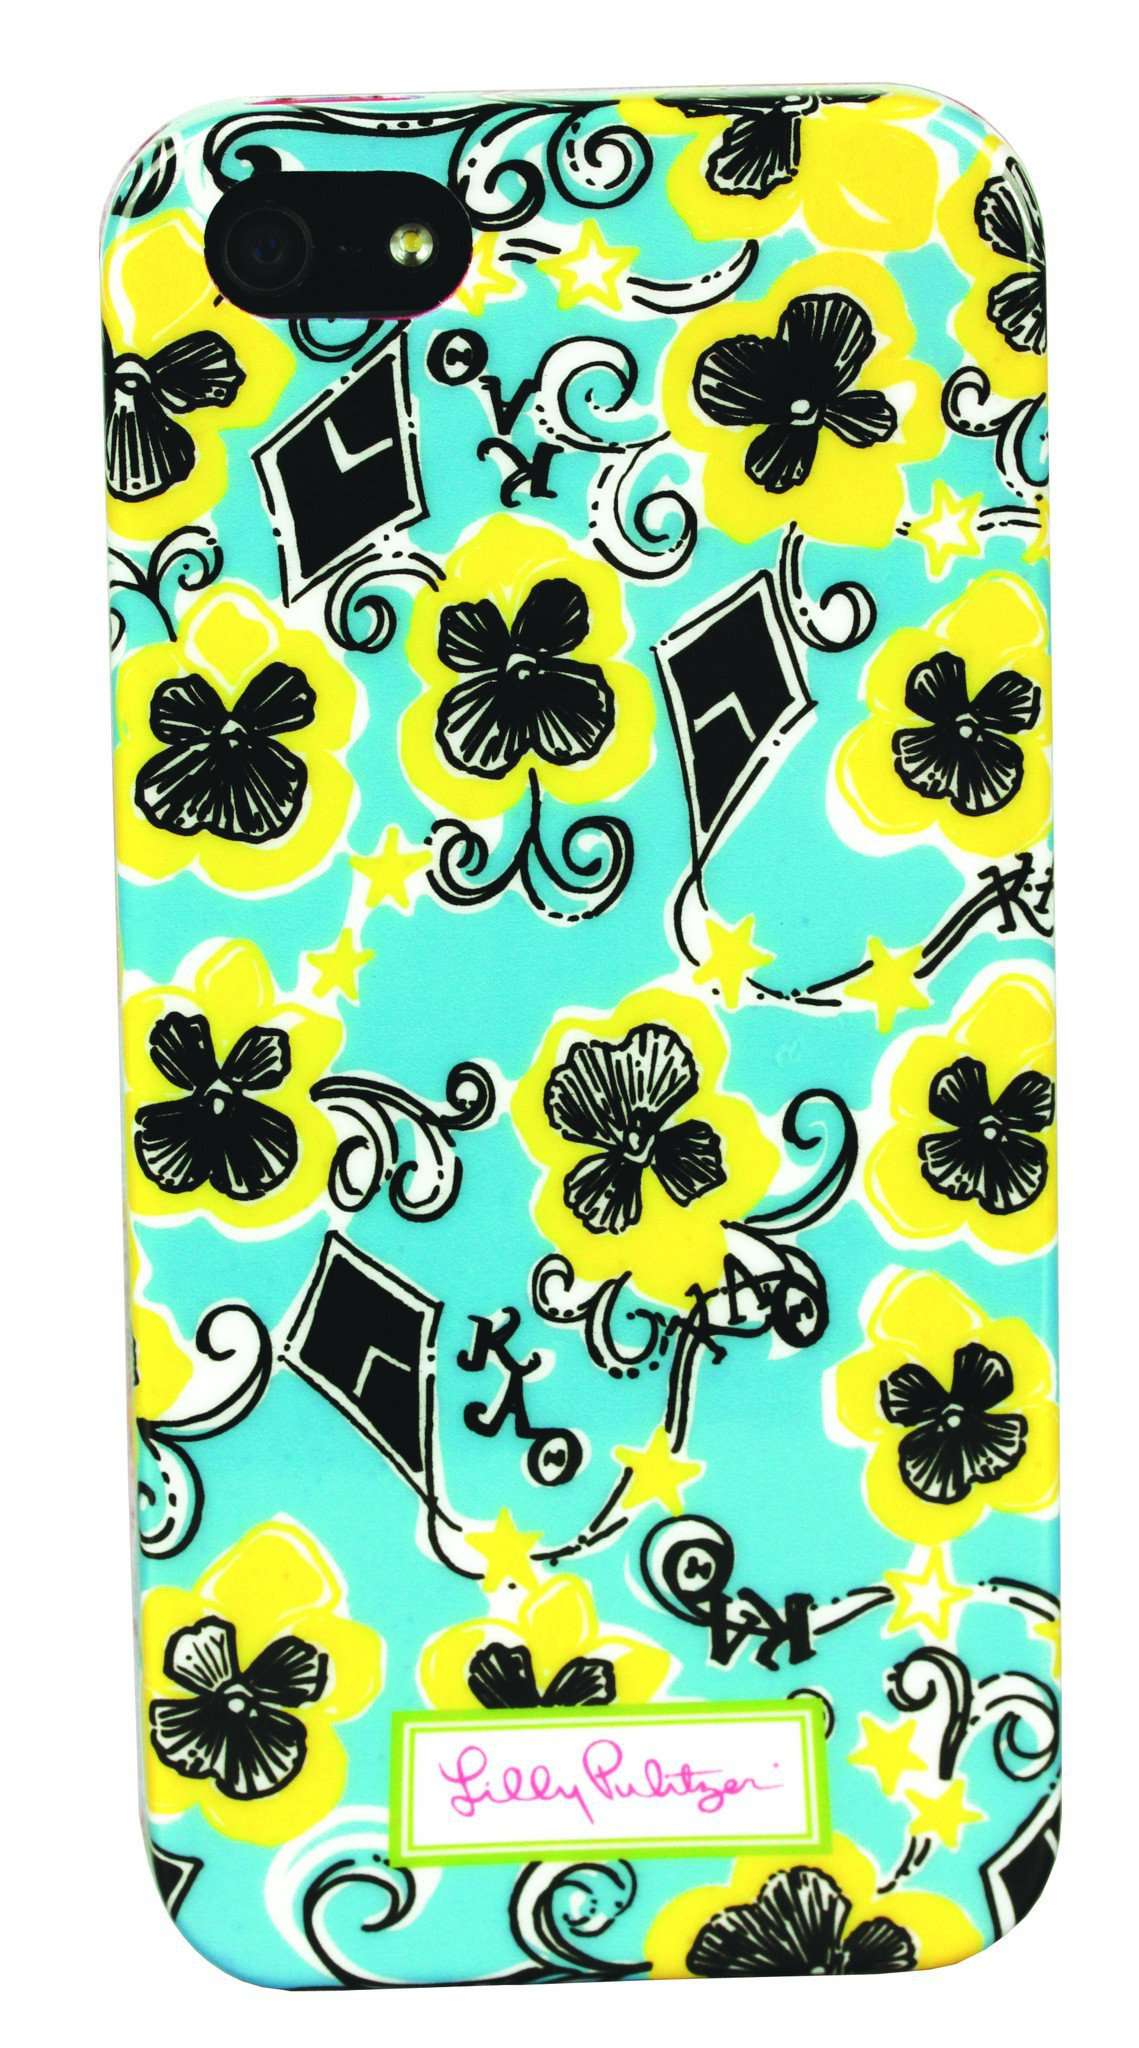 Kappa Alpha Theta iPhone 5/5s Cover by Lilly Pulitzer - Country Club Prep